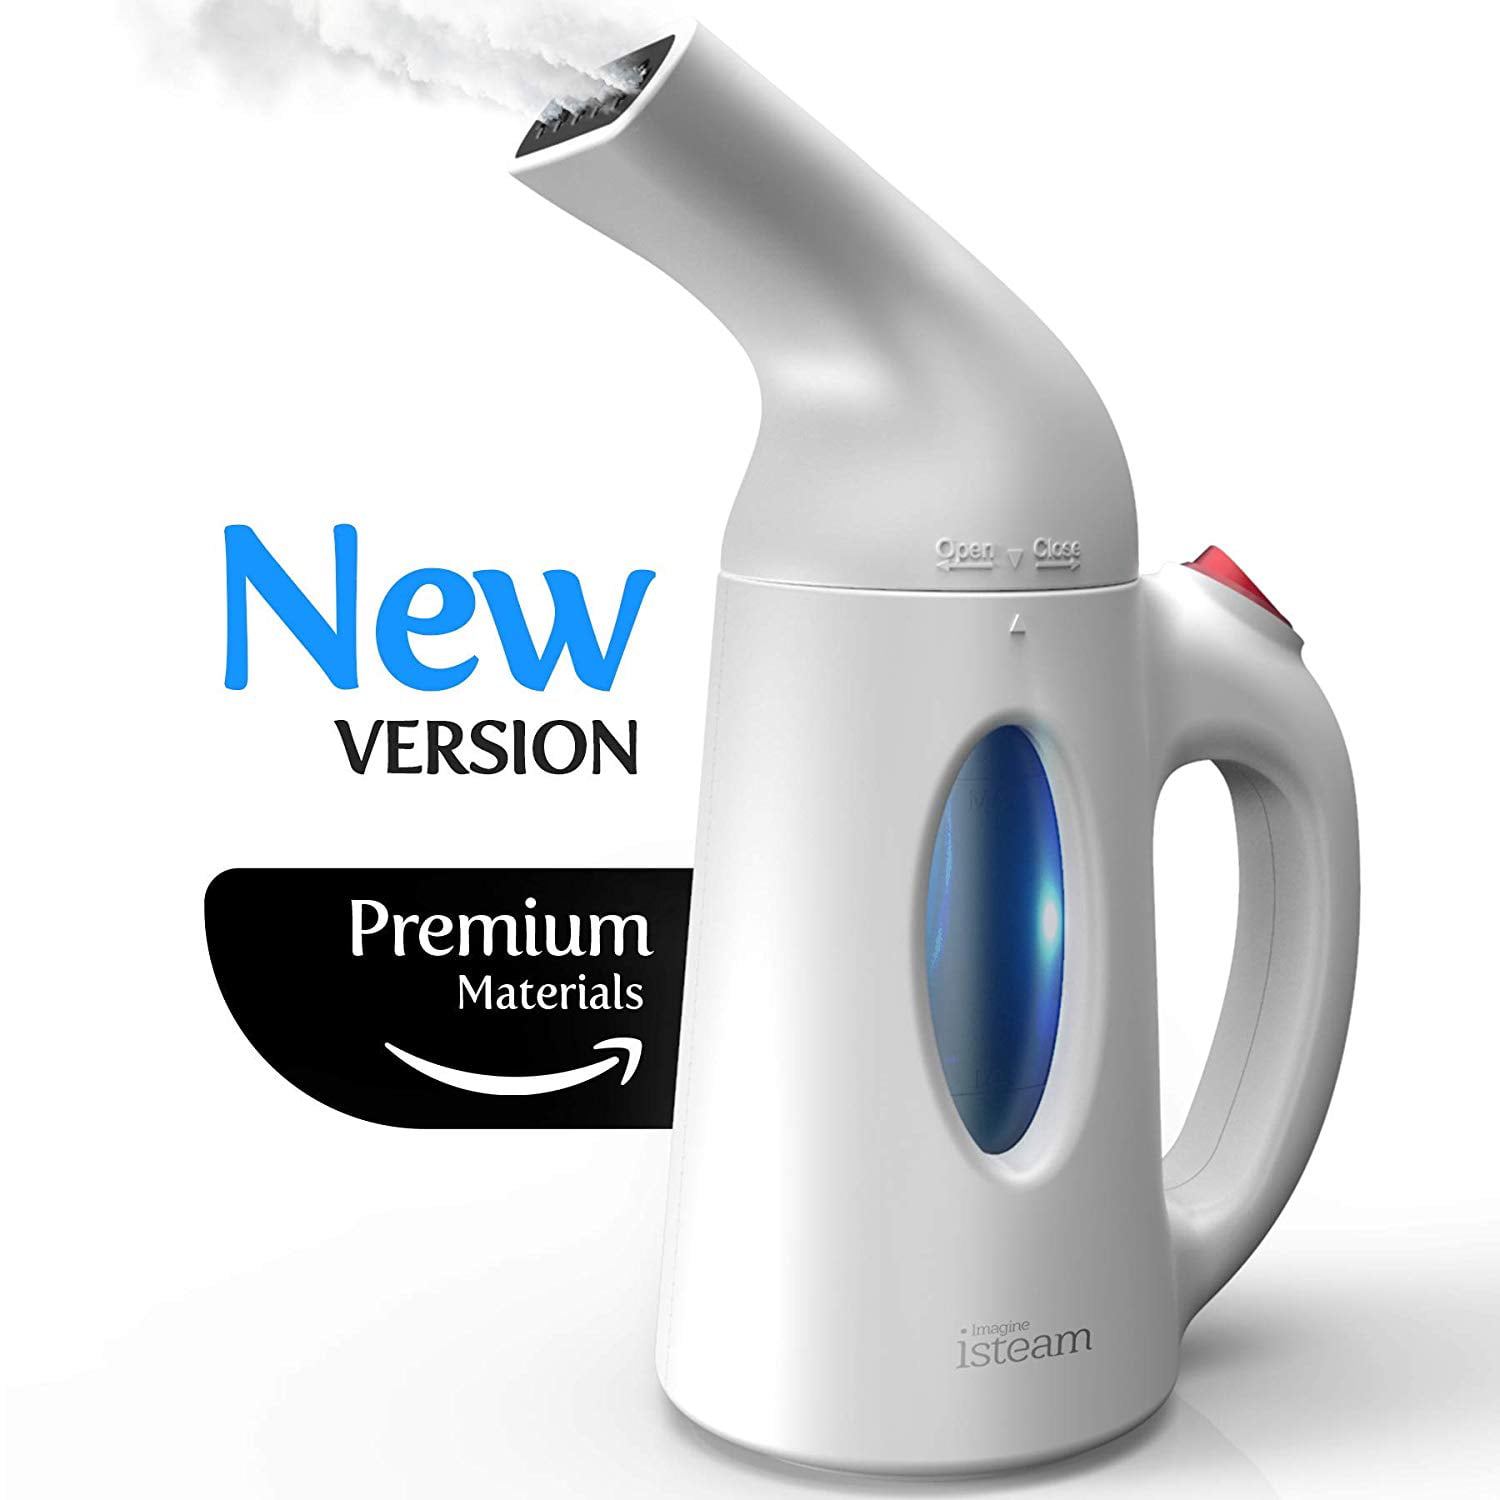 iSteam Luxury Edition Steamer New Technology 7-in-1 Powerful